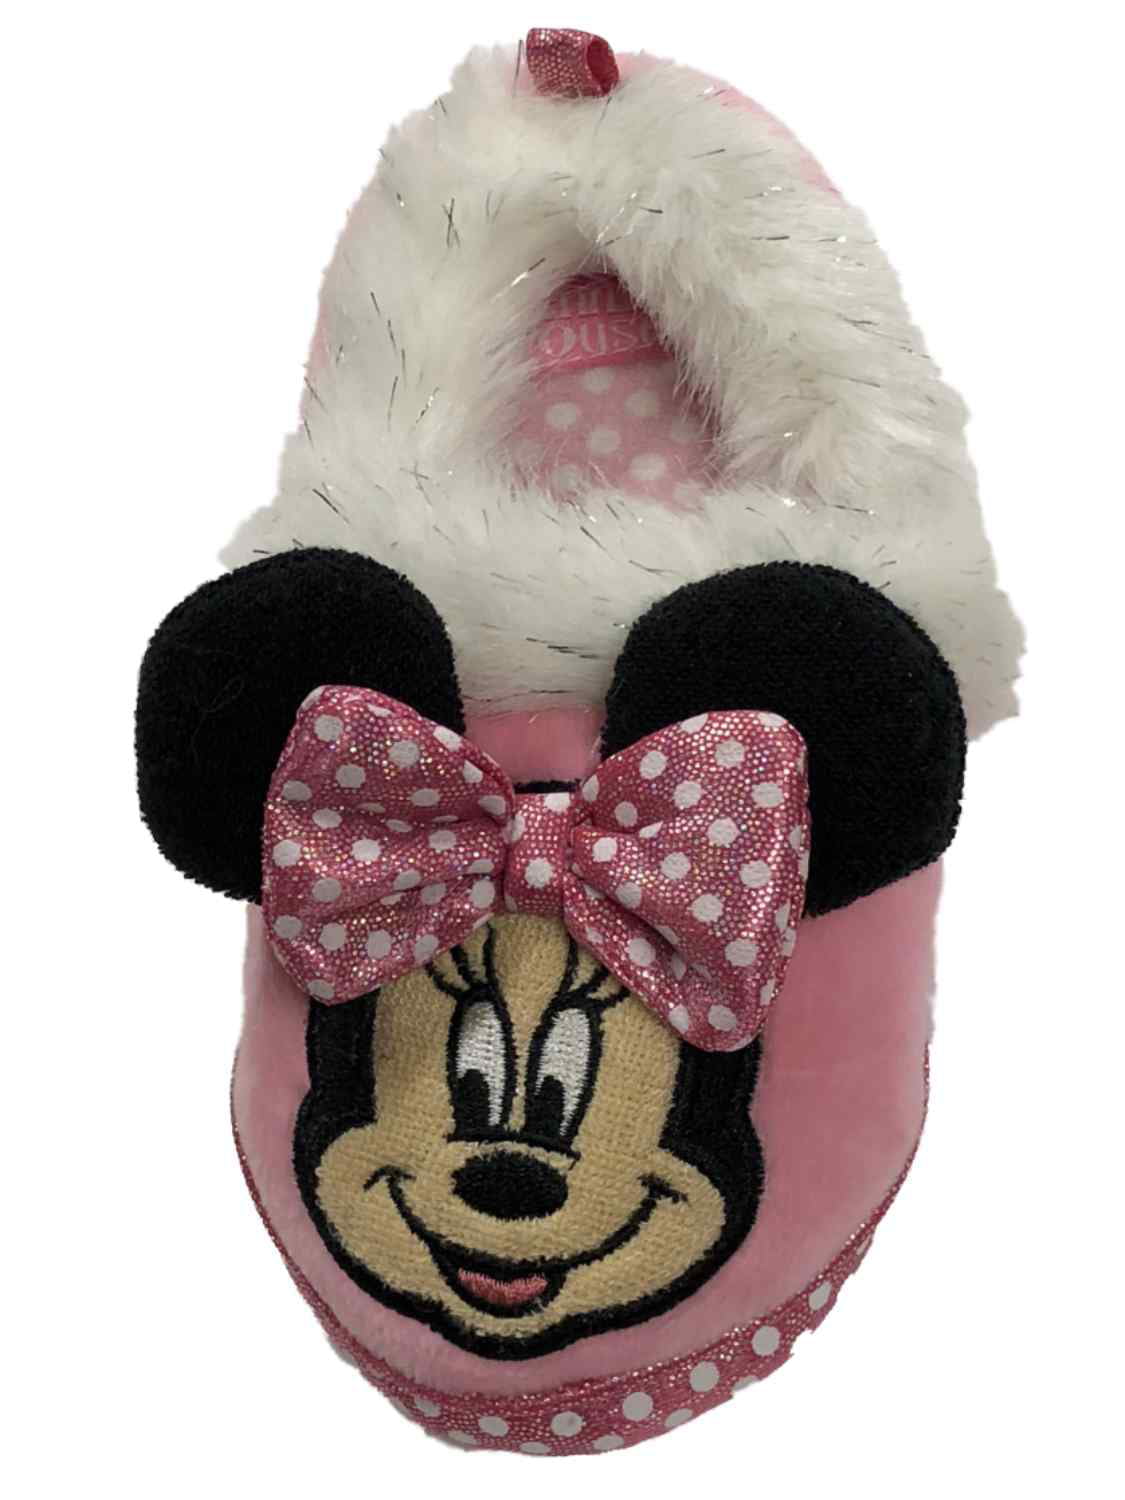 mickey mouse slippers walmart